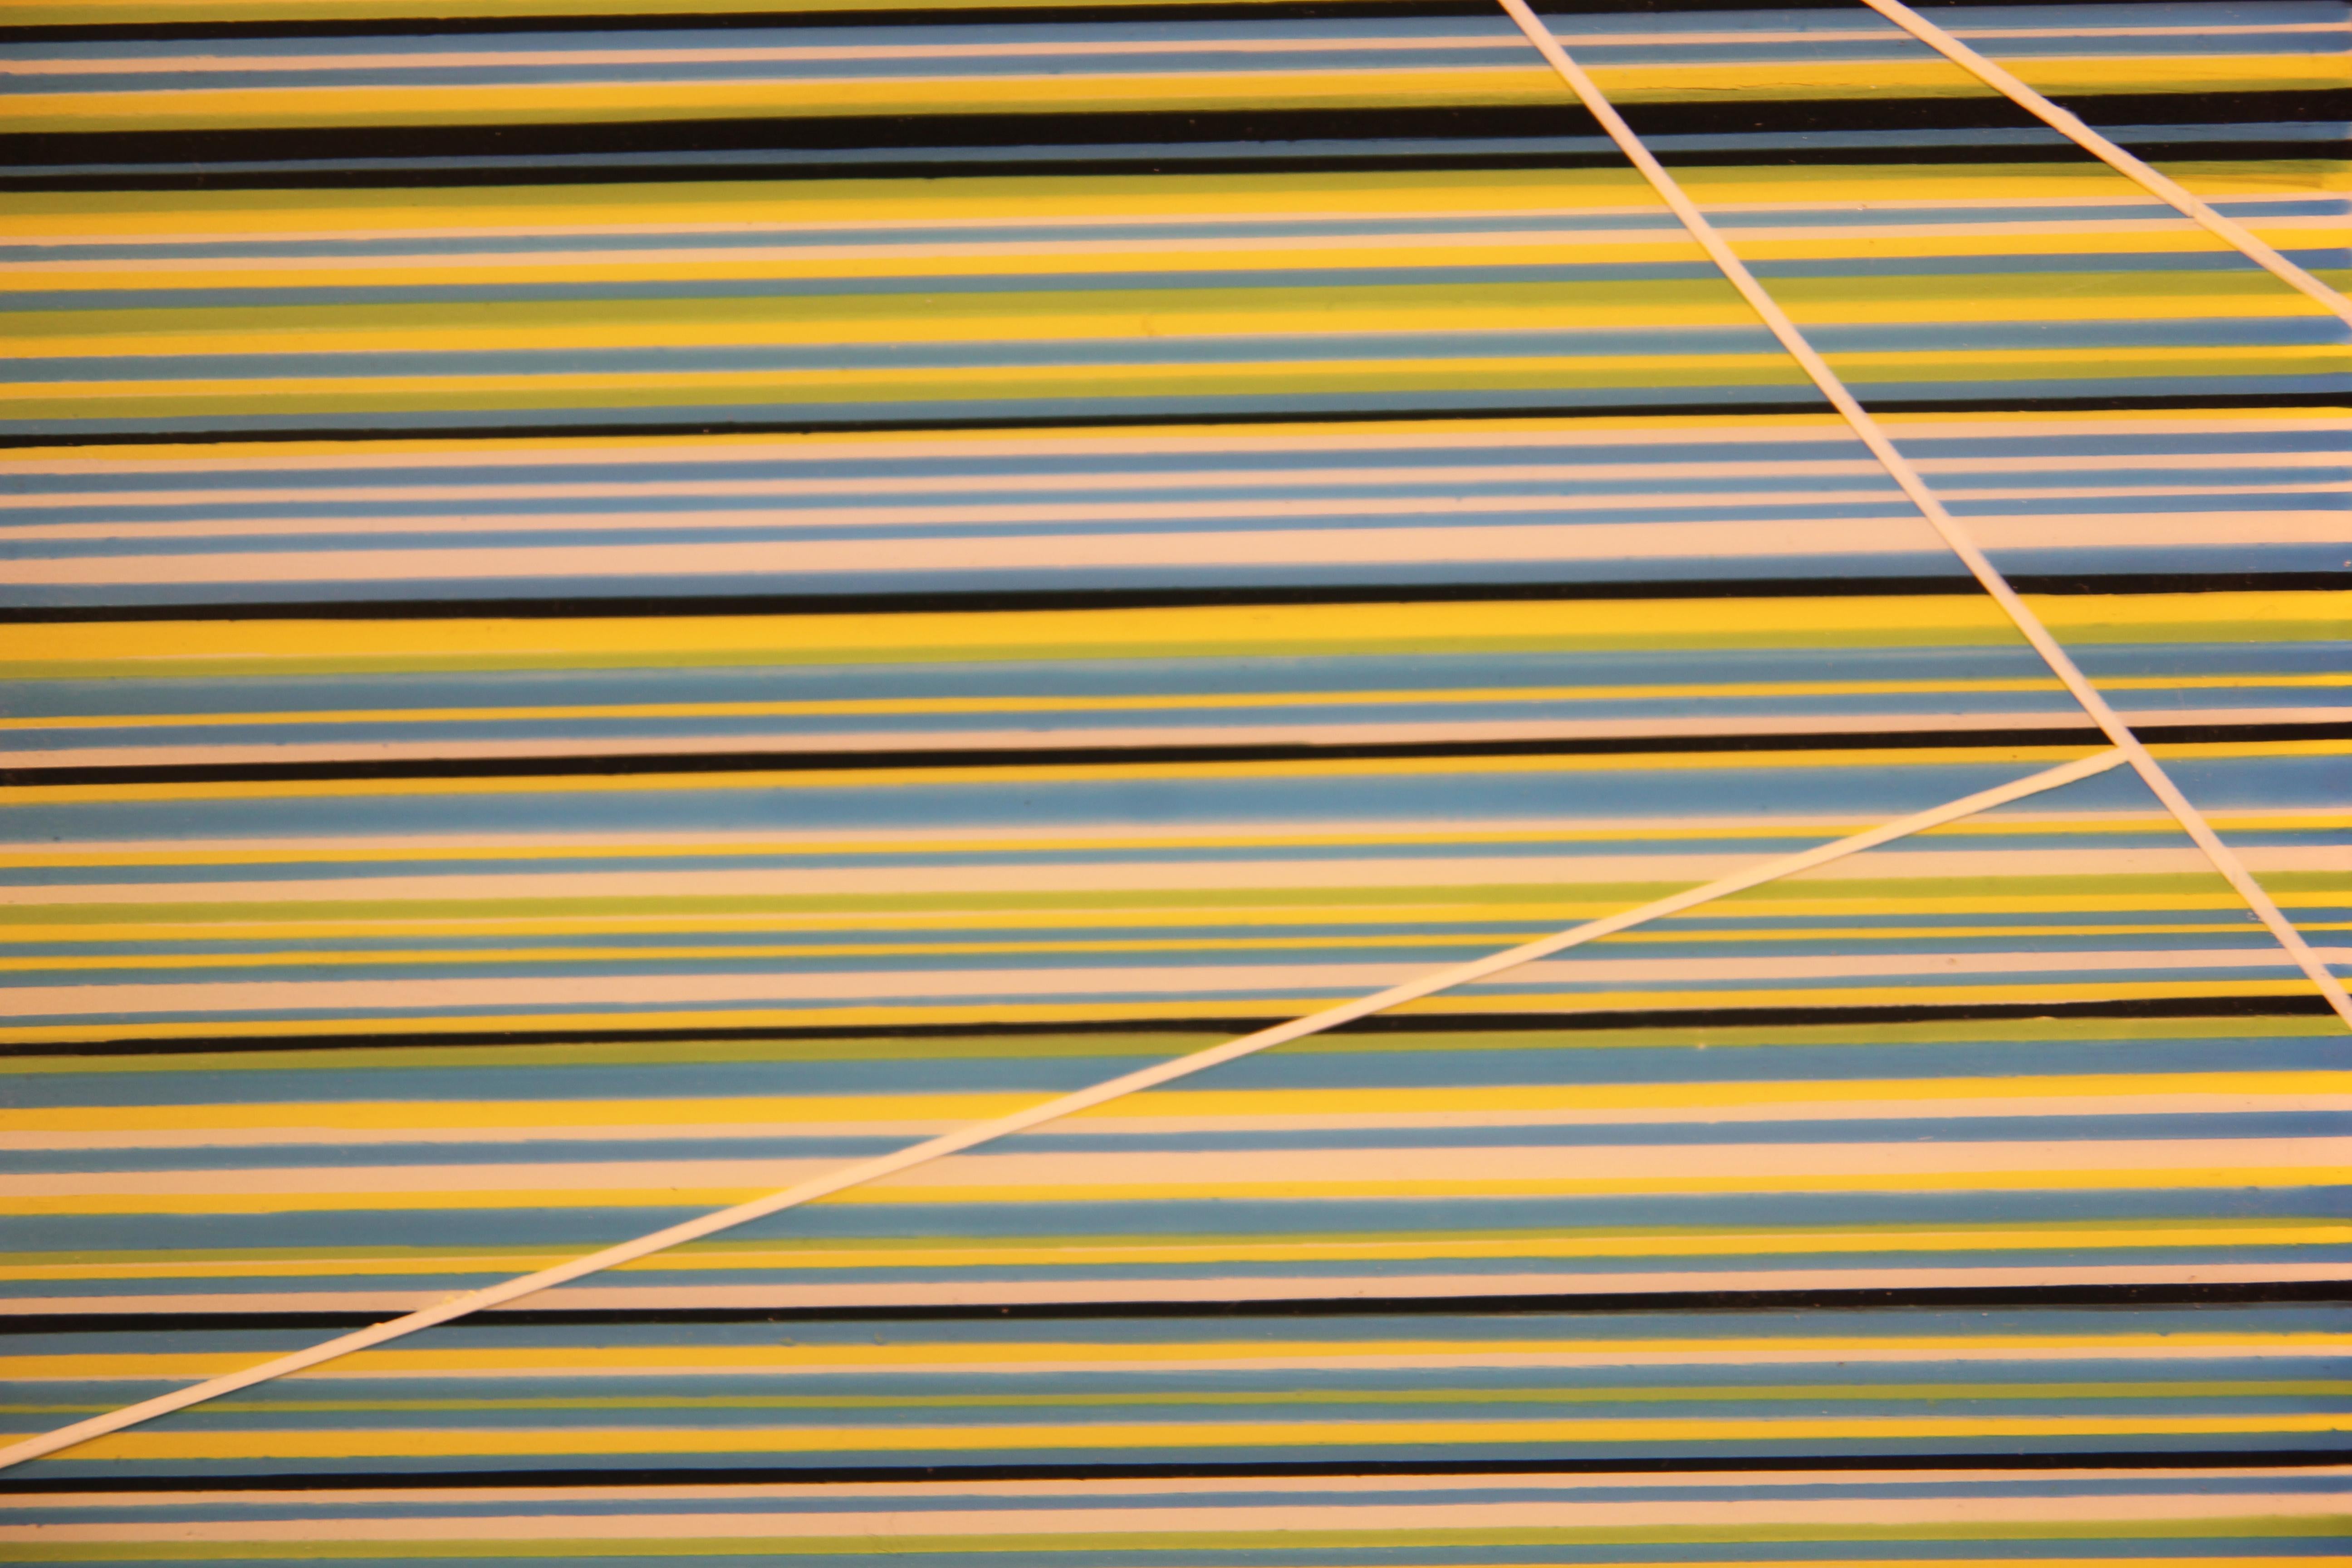 Similar to the work of Carlos Cruz-Diez and Gene Davis. Minimal linear abstract painting with different colored parallel lines across the canvas. The work is signed, titled and dated on the back of the canvas by the artist. The canvas is not